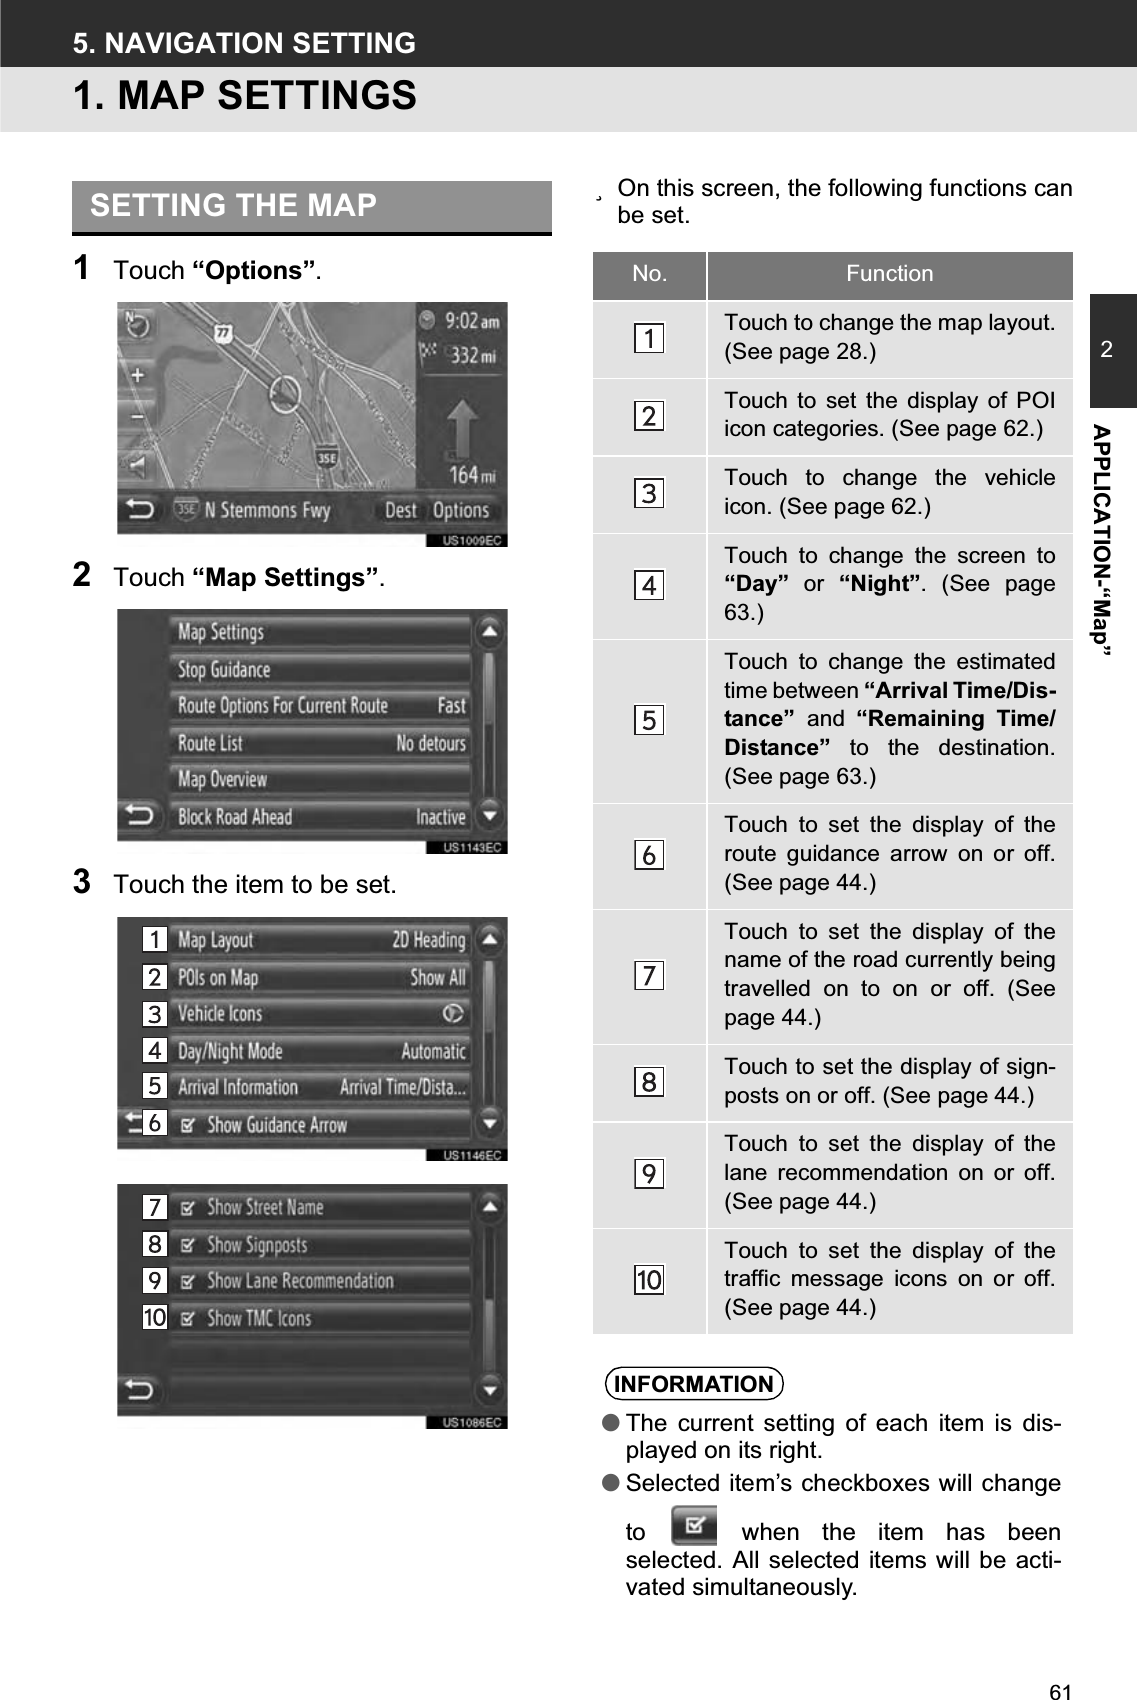 612APPLICATION-“Map”5. NAVIGATION SETTING1. MAP SETTINGS1Touch “Options”.2Touch “Map Settings”.3Touch the item to be set.zOn this screen, the following functions canbe set.SETTING THE MAPNo. FunctionTouch to change the map layout.(See page 28.)Touch to set the display of POIicon categories. (See page 62.)Touch to change the vehicleicon. (See page 62.)Touch to change the screen to“Day” or “Night”. (See page63.)Touch to change the estimatedtime between “Arrival Time/Dis-tance” and “Remaining Time/Distance” to the destination.(See page 63.)Touch to set the display of theroute guidance arrow on or off.(See page 44.)Touch to set the display of thename of the road currently beingtravelled on to on or off. (Seepage 44.)Touch to set the display of sign-posts on or off. (See page 44.)Touch to set the display of thelane recommendation on or off.(See page 44.)Touch to set the display of thetraffic message icons on or off.(See page 44.)INFORMATION●The current setting of each item is dis-played on its right.●Selected item’s checkboxes will changeto   when the item has beenselected. All selected items will be acti-vated simultaneously.